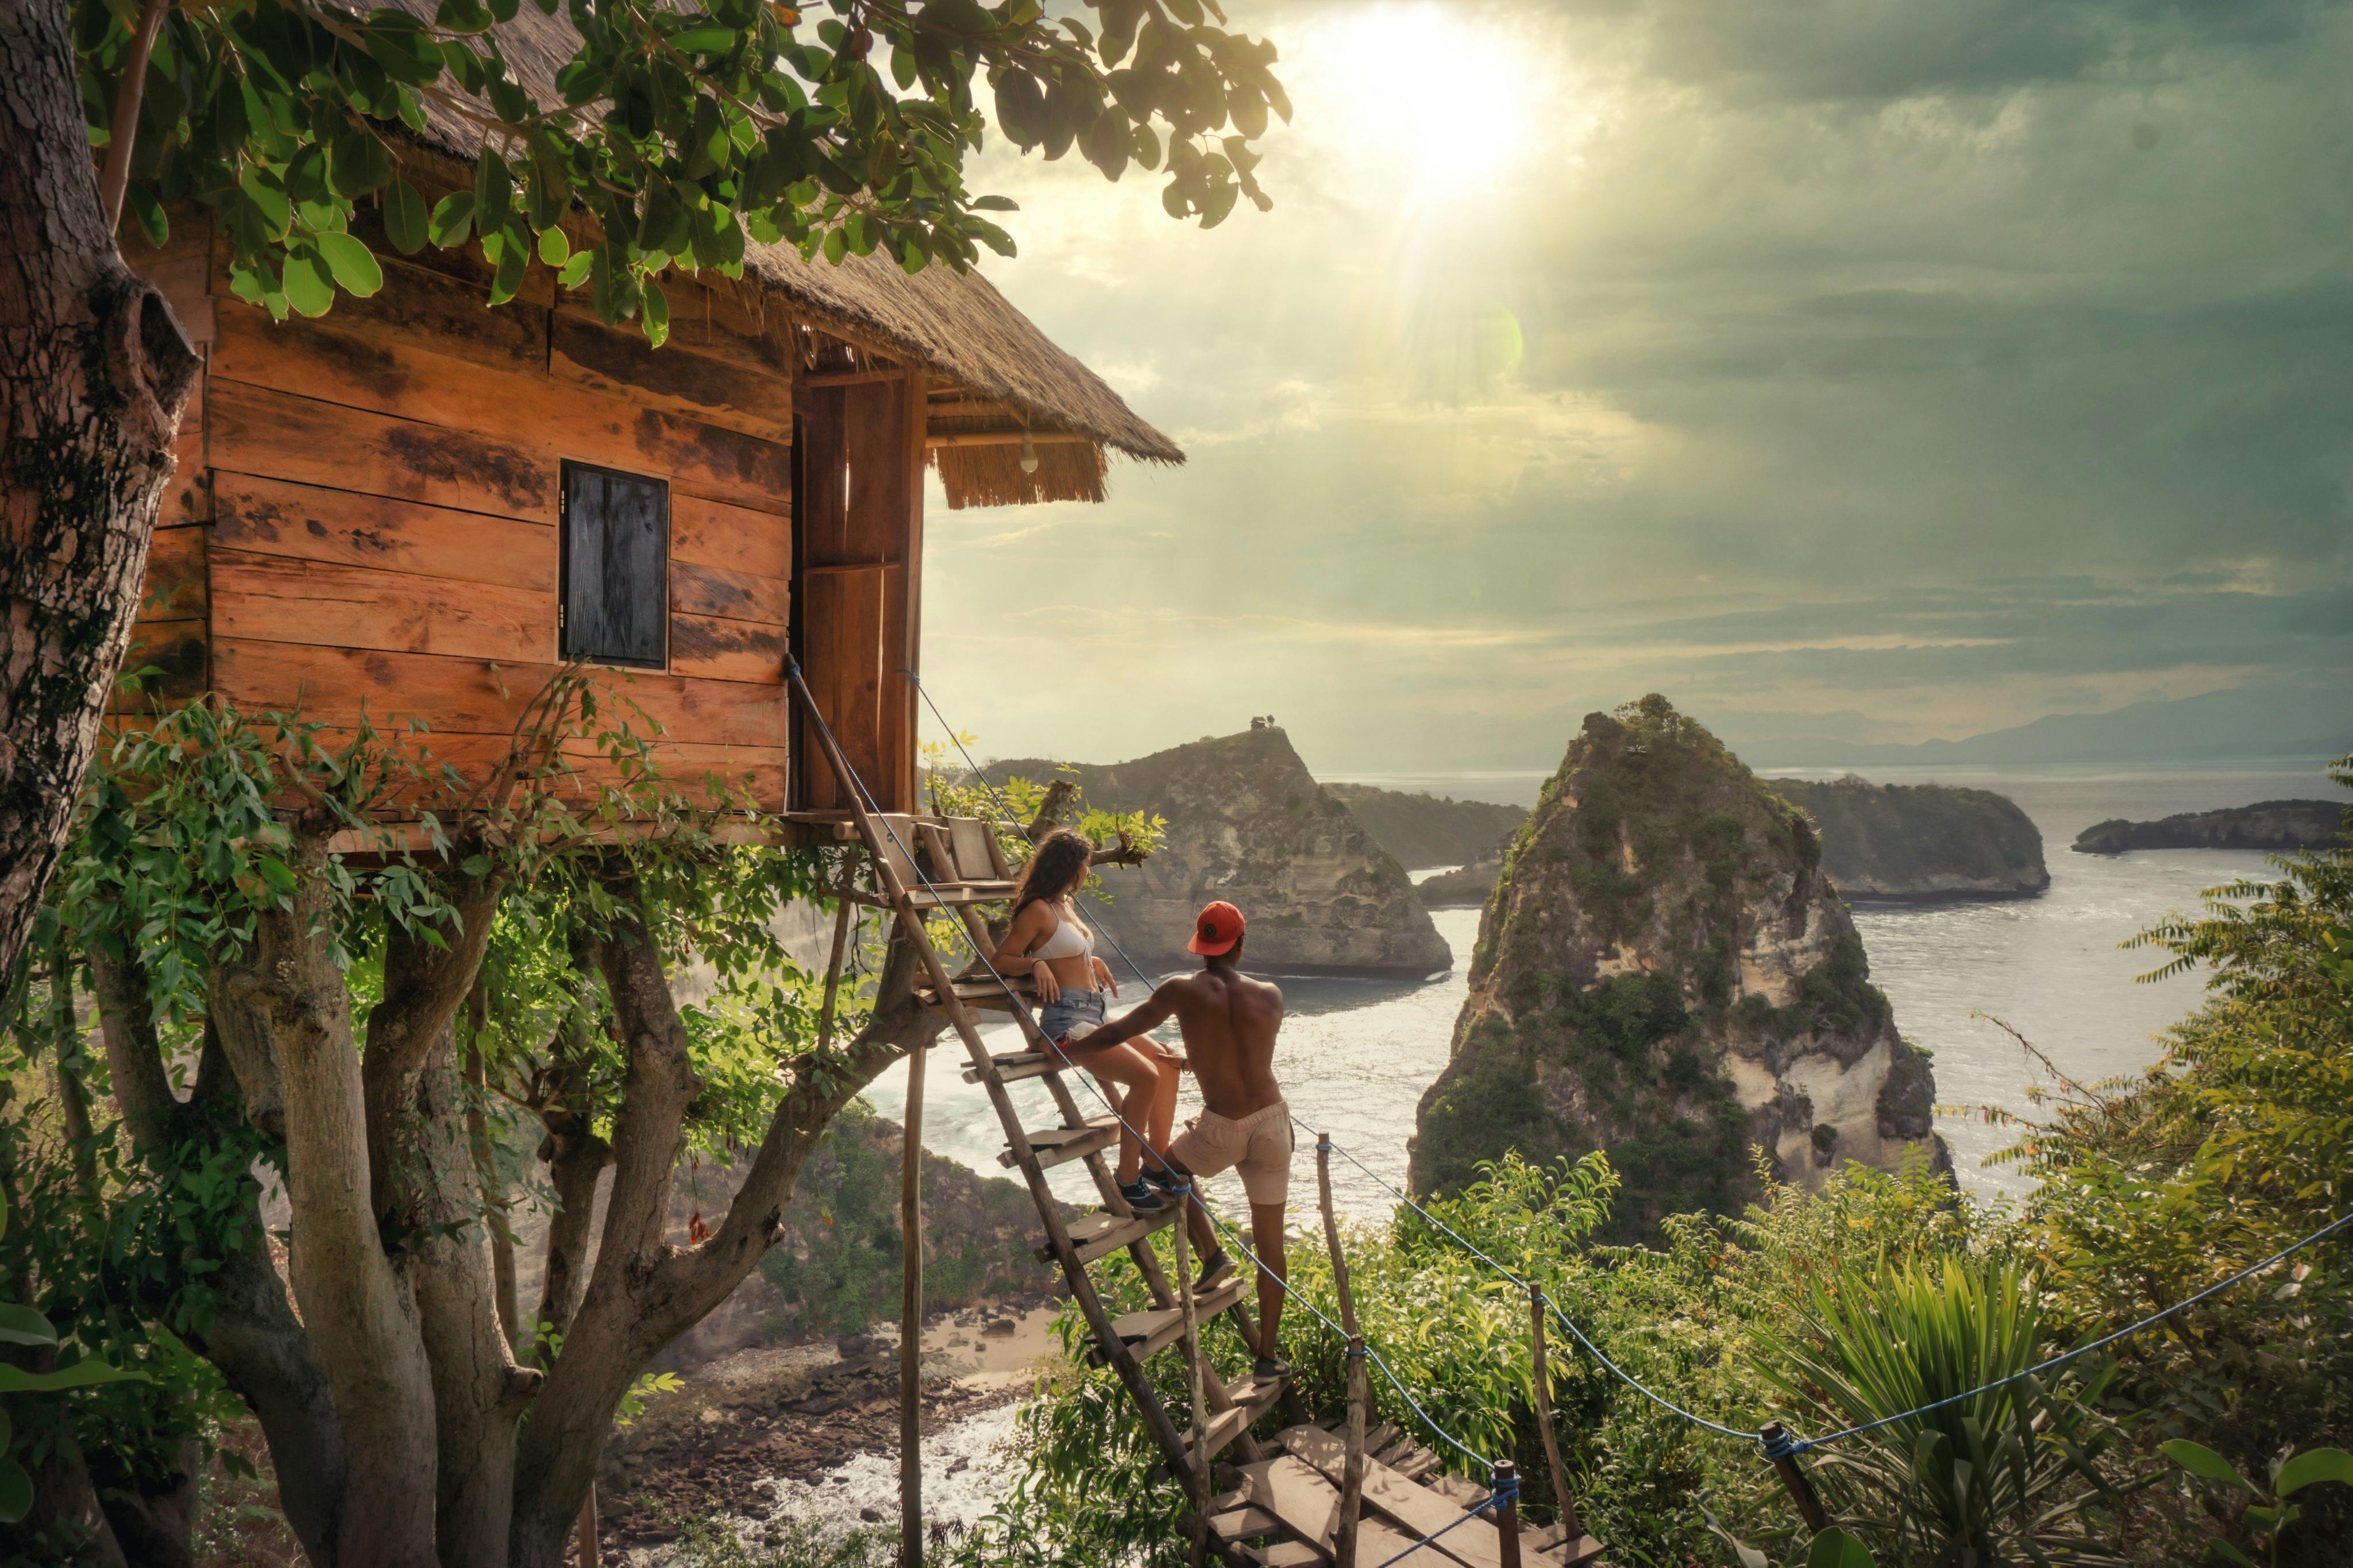 Bali, Indonesia  Couple Sitting on Brown Wooden Ladder